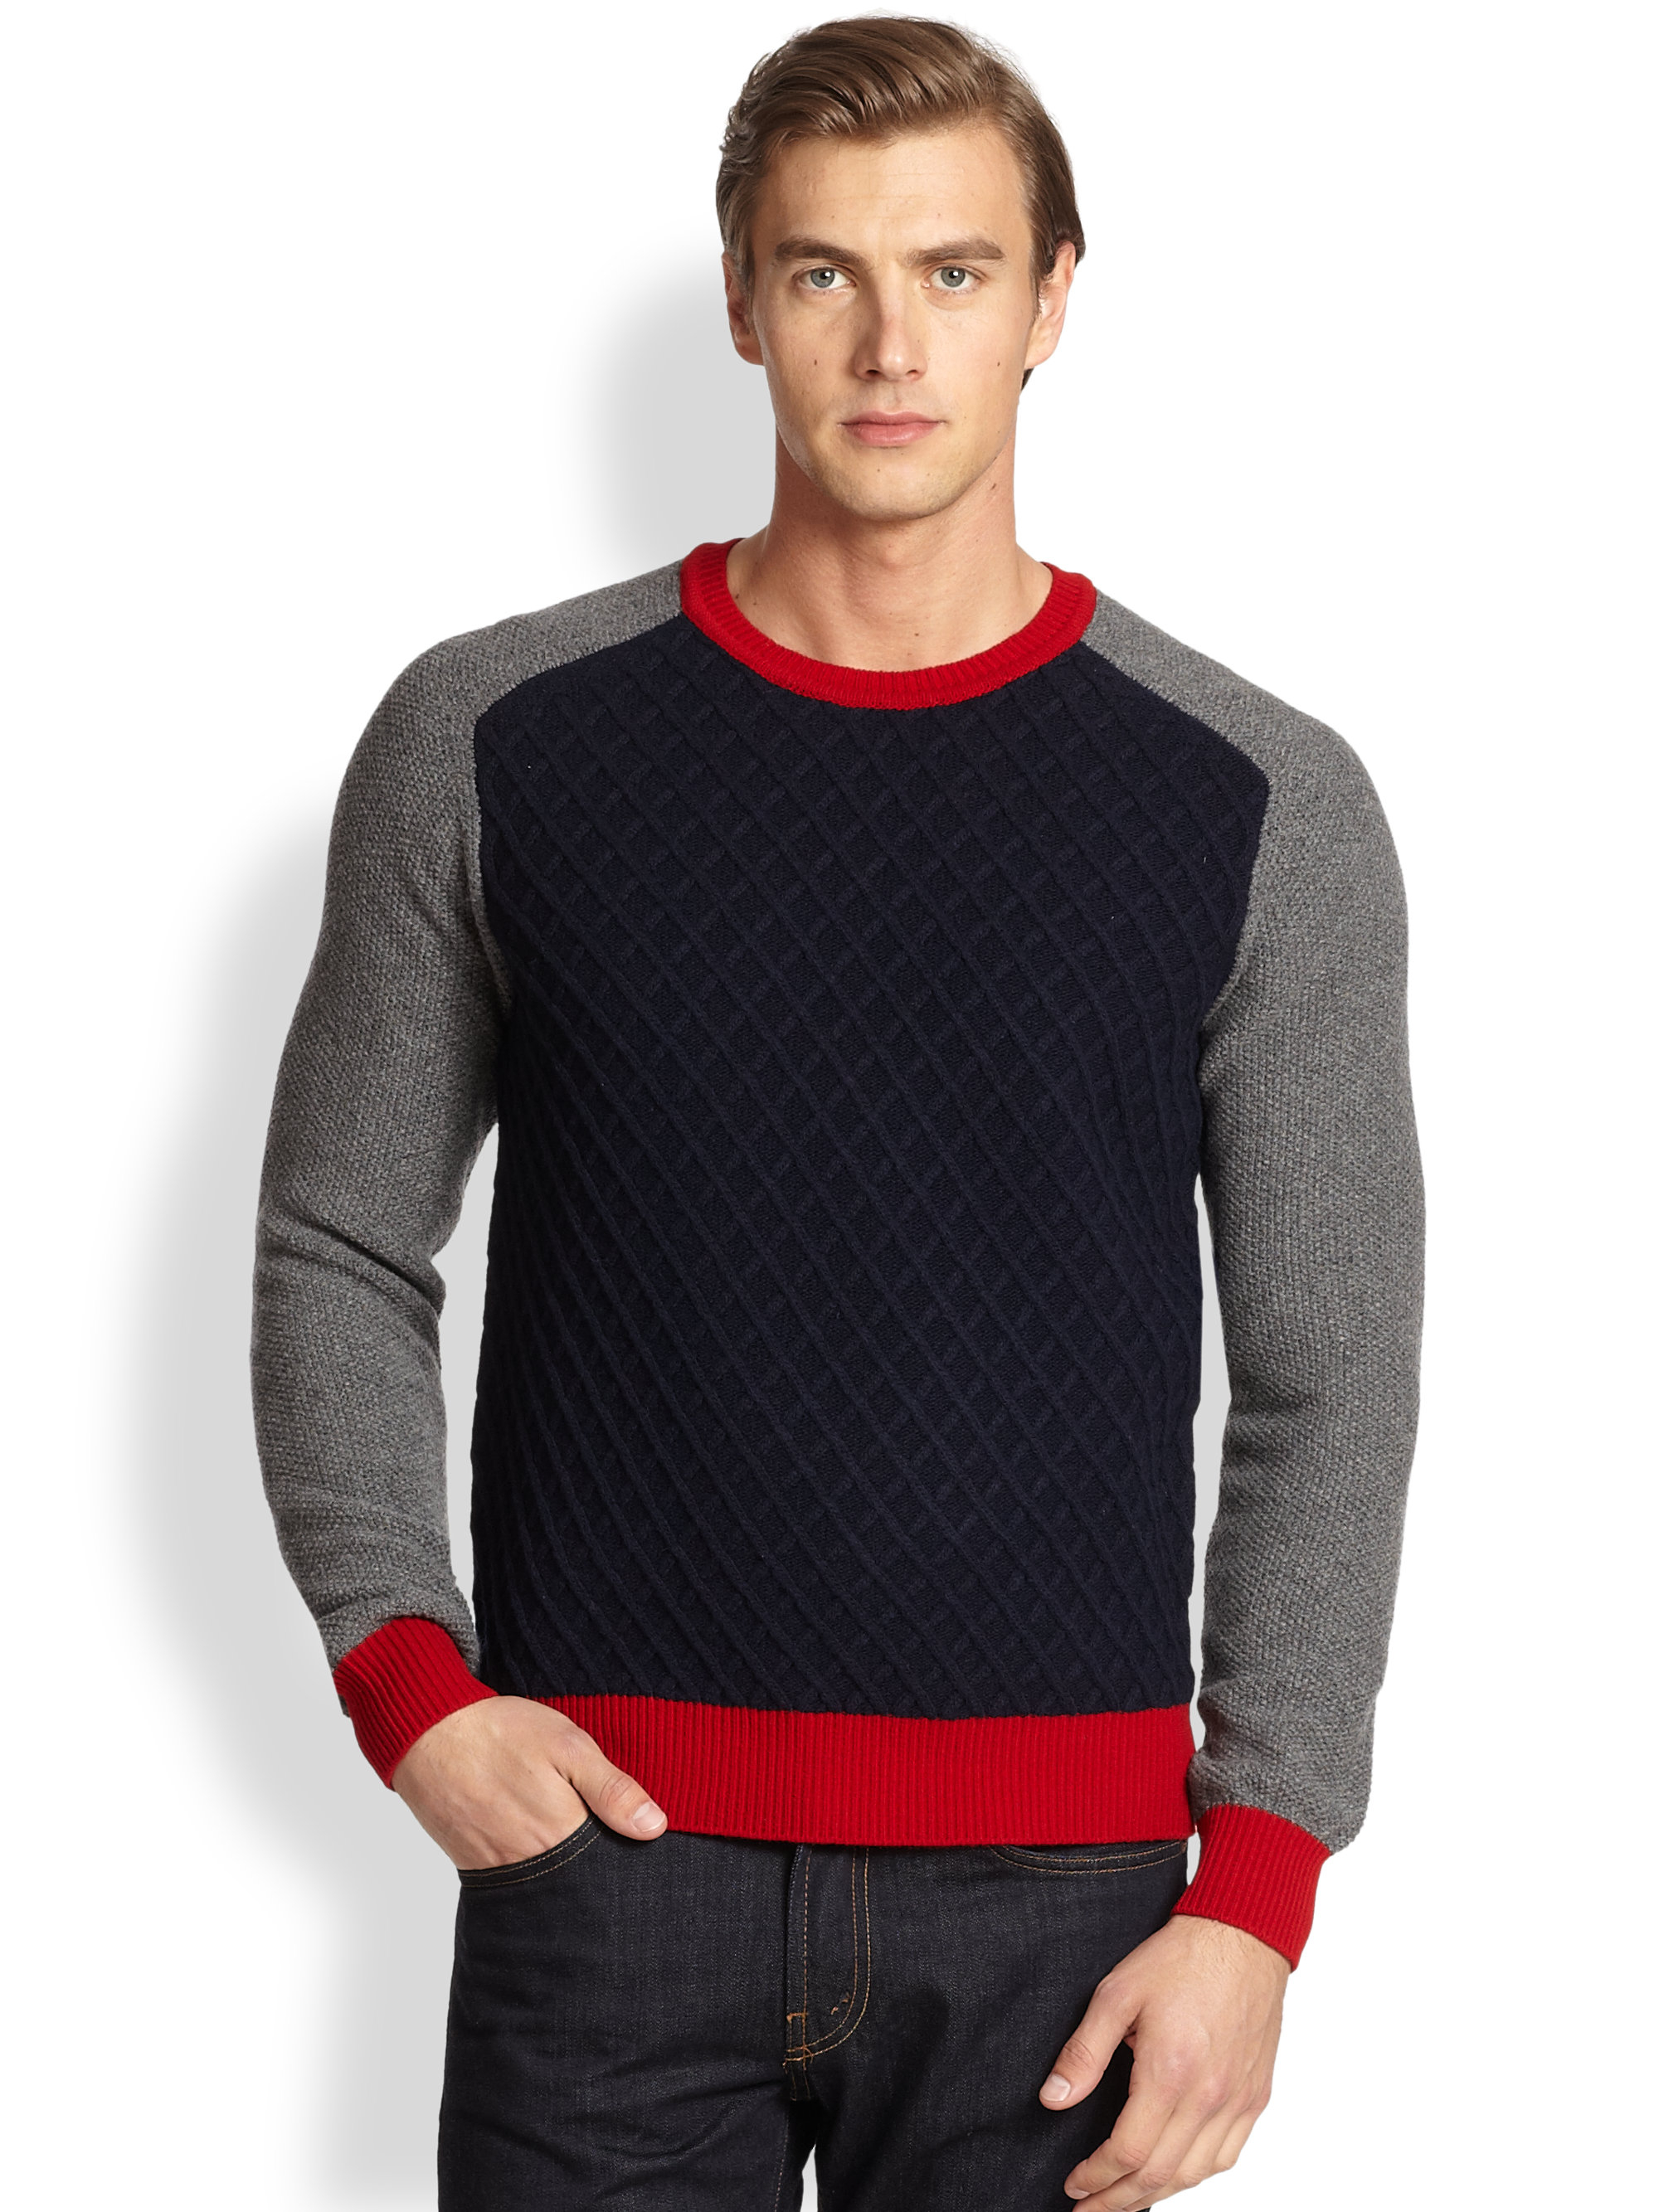 Lyst - F. Faconnable Colorblock Sweater in Blue for Men